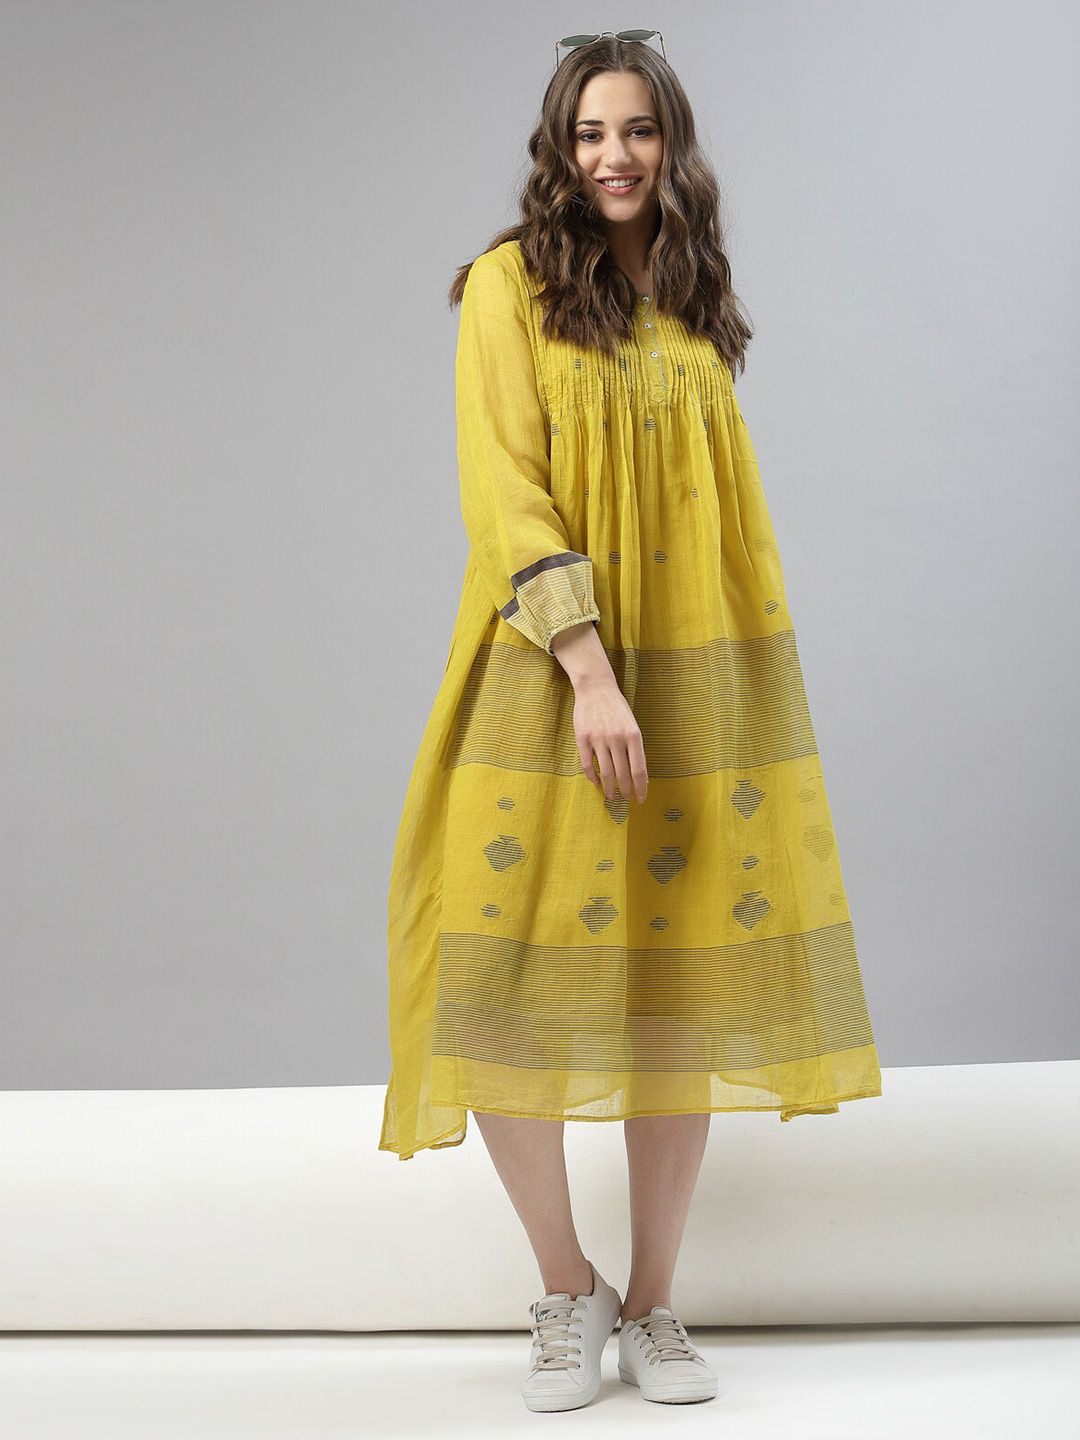 TERQUOIS Yellow Ethnic Motifs A-Line Midi Dress Price in India